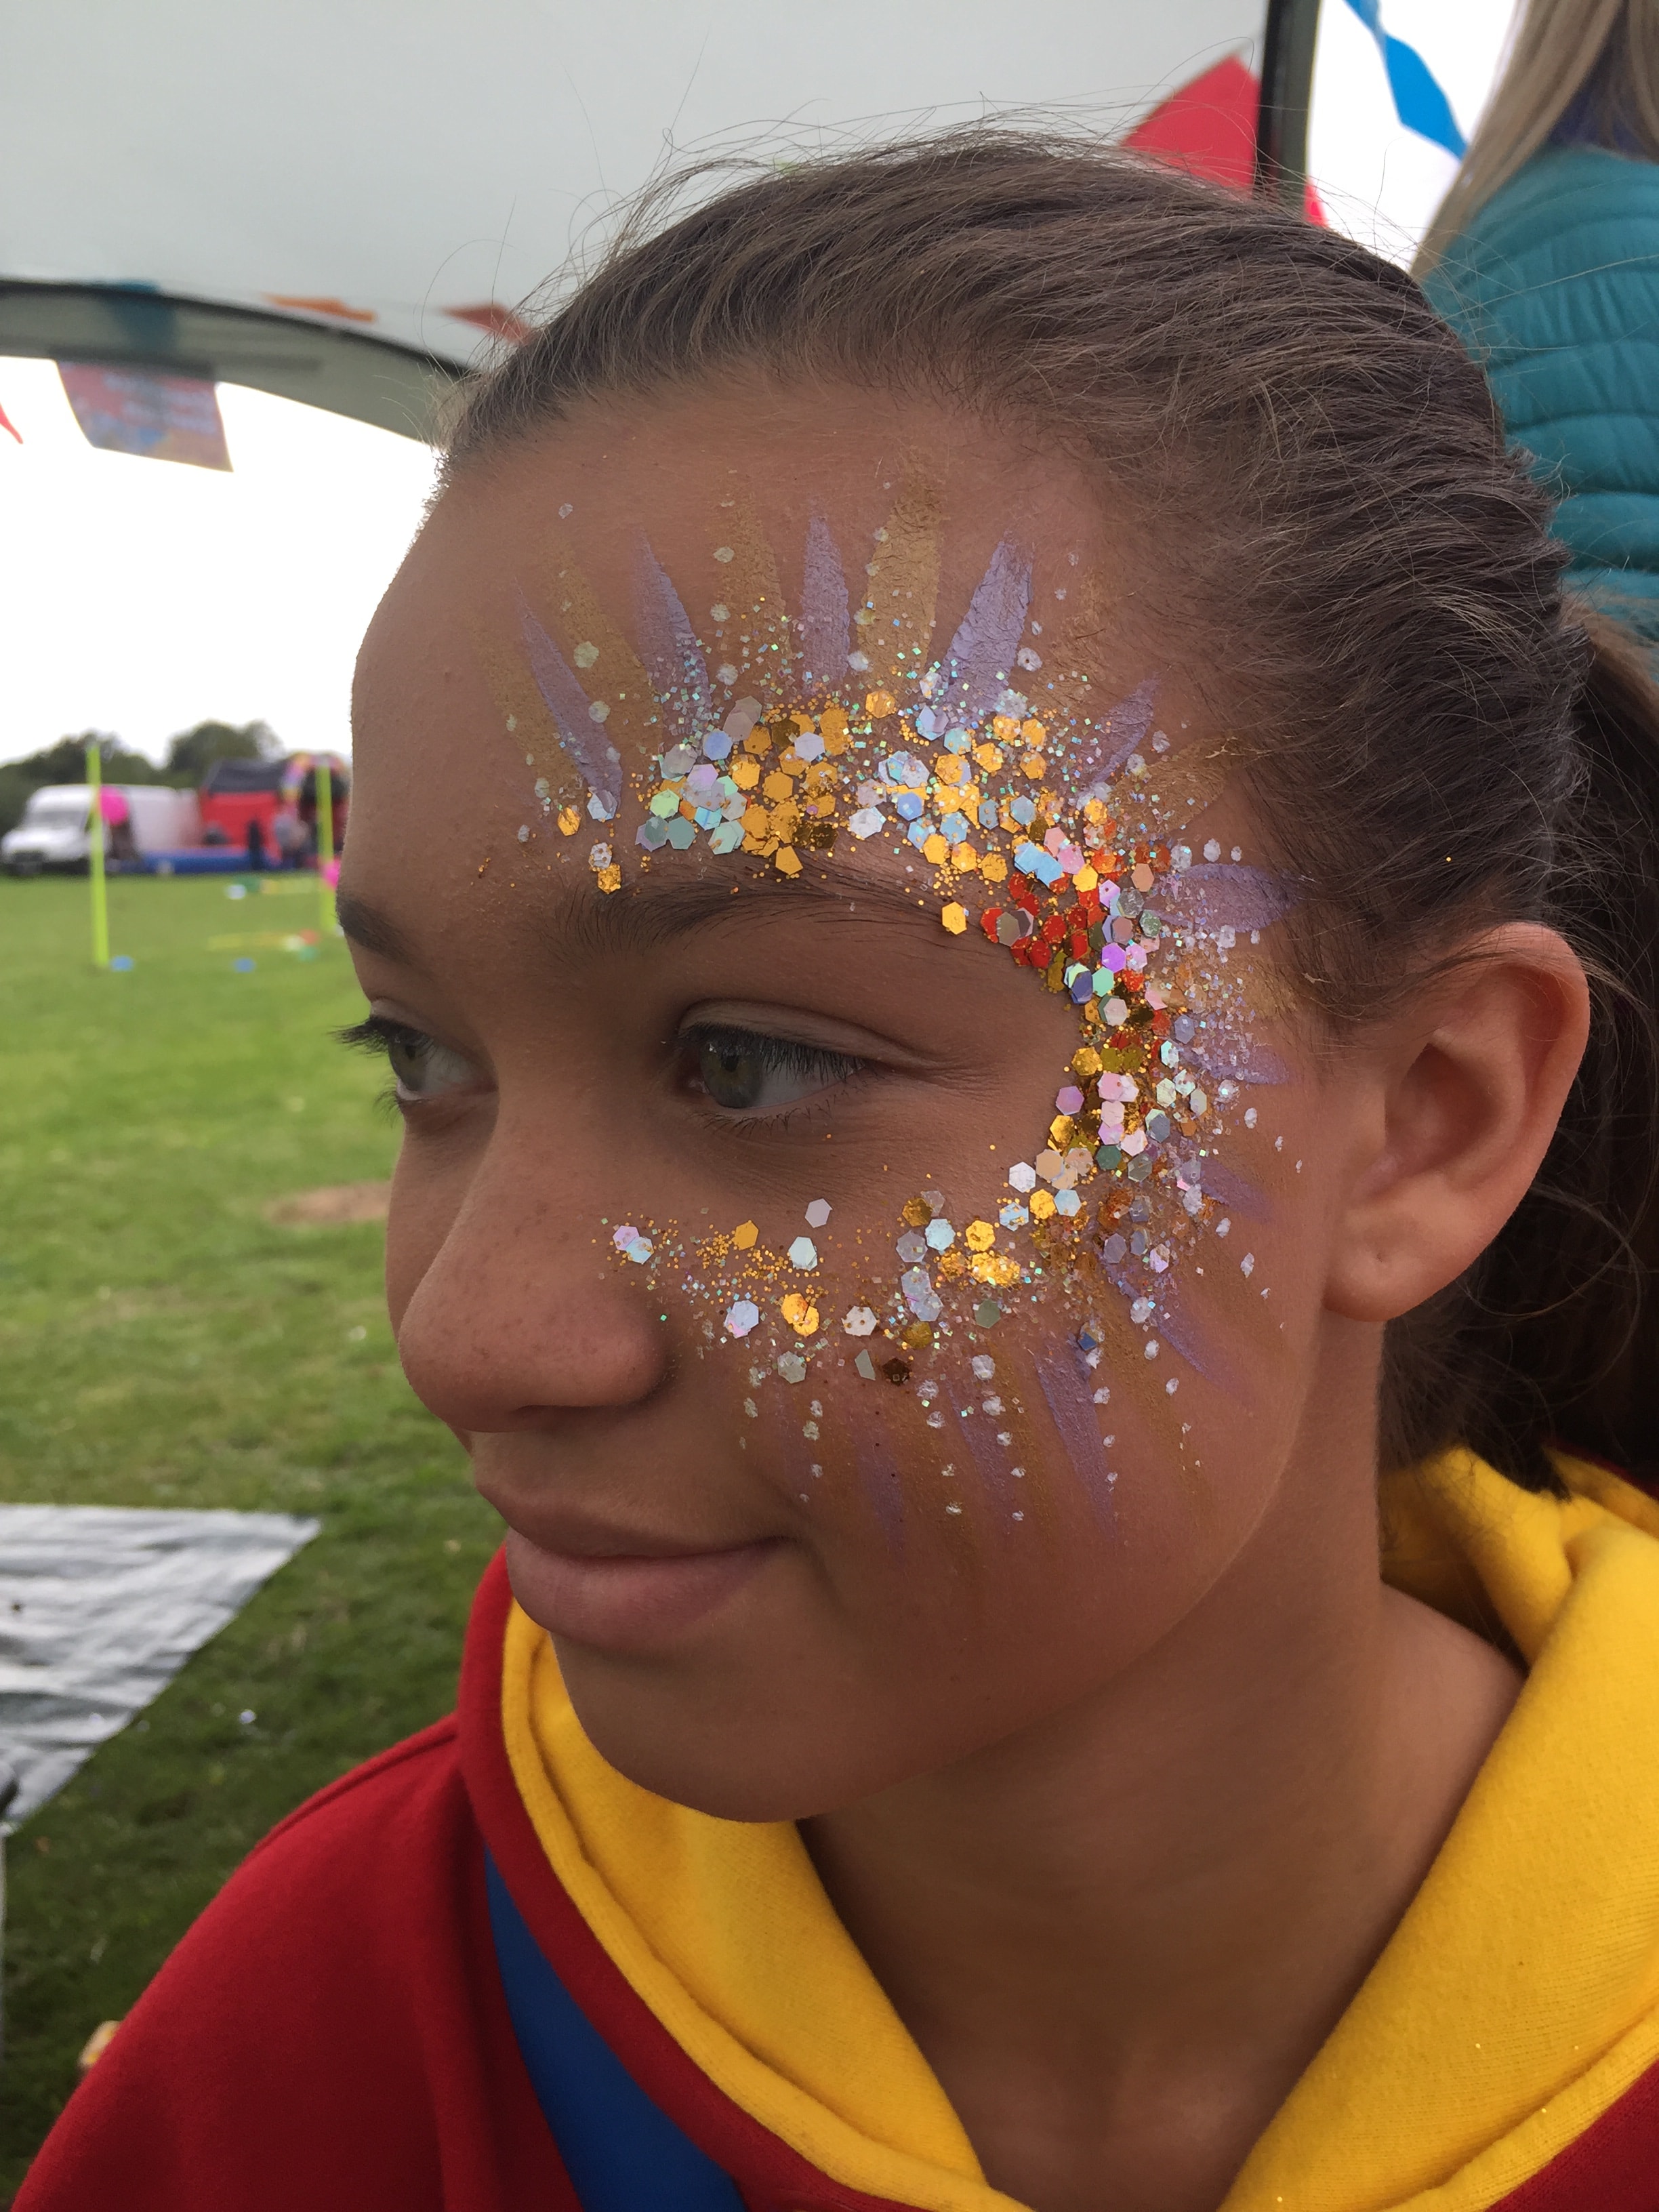 Face Painter That Will Bring Magic to Any Occasion